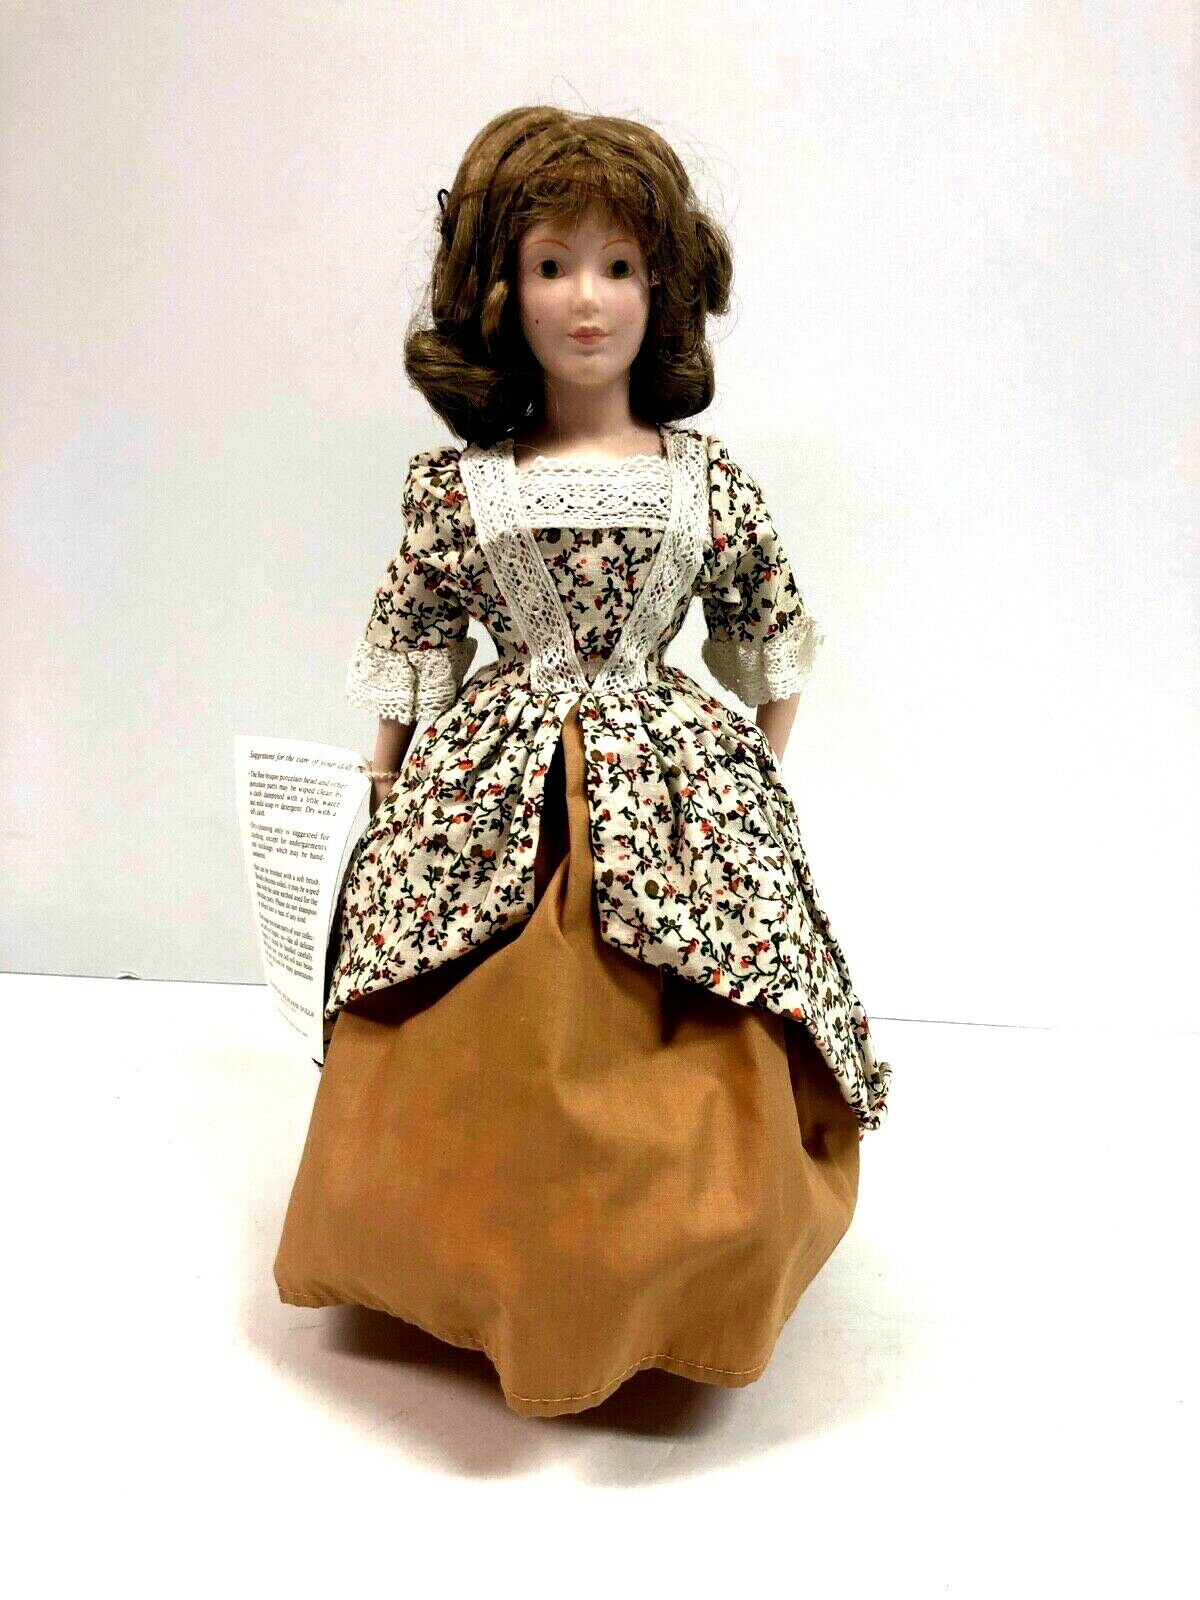 Franklin Heirloom Doll Girl With Floral Dress 13 In With Stand